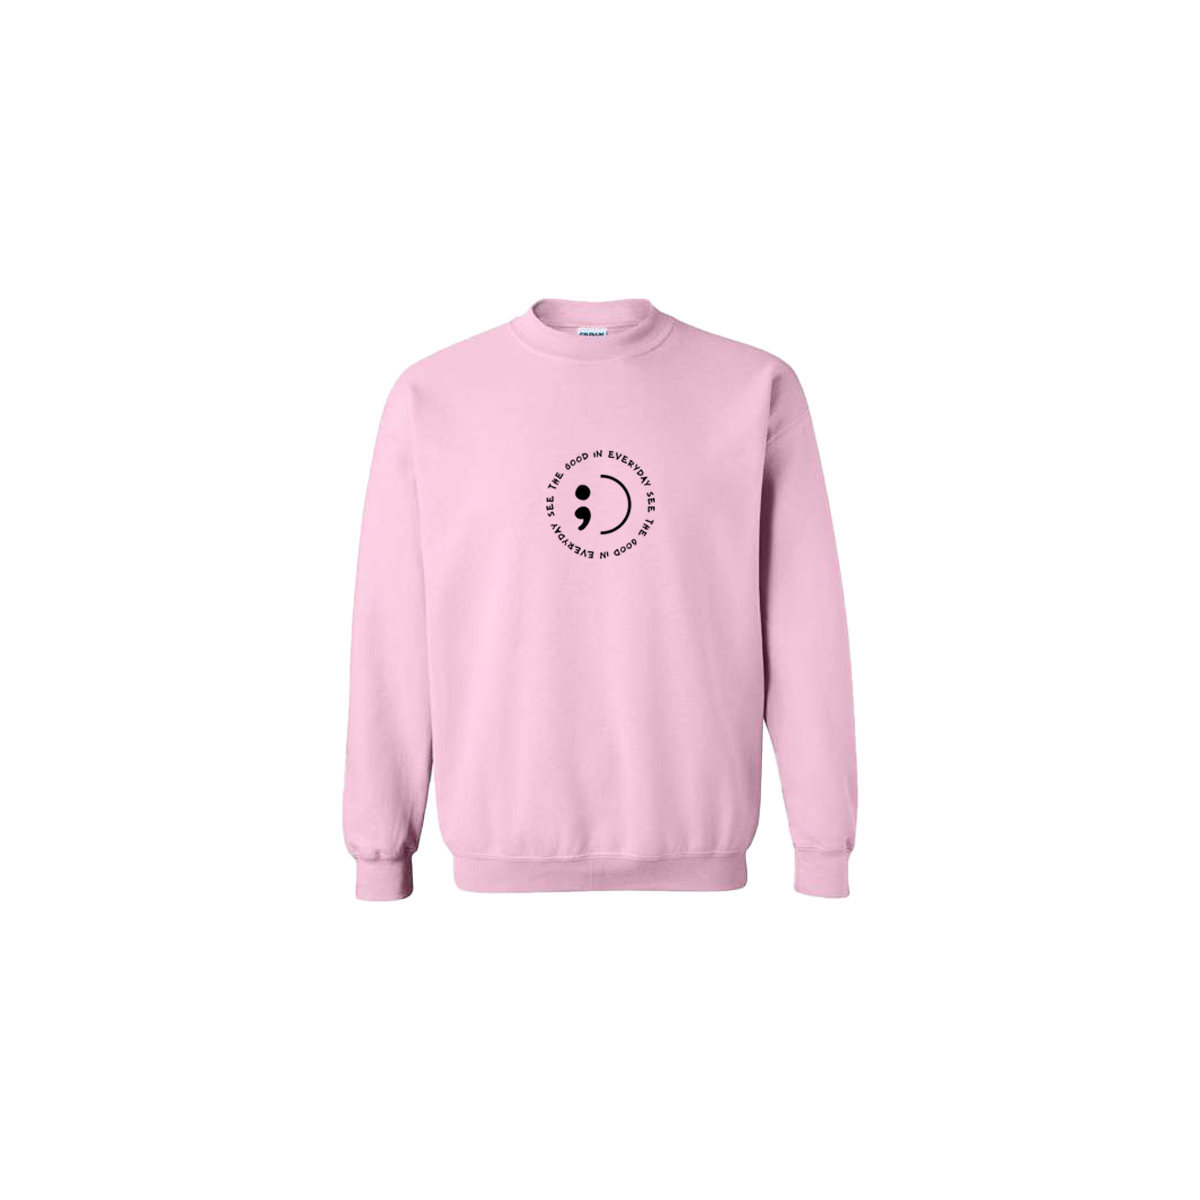 See the Good in Everyday Embroidered Light Pink Crewneck - Mental Health Awareness Clothing